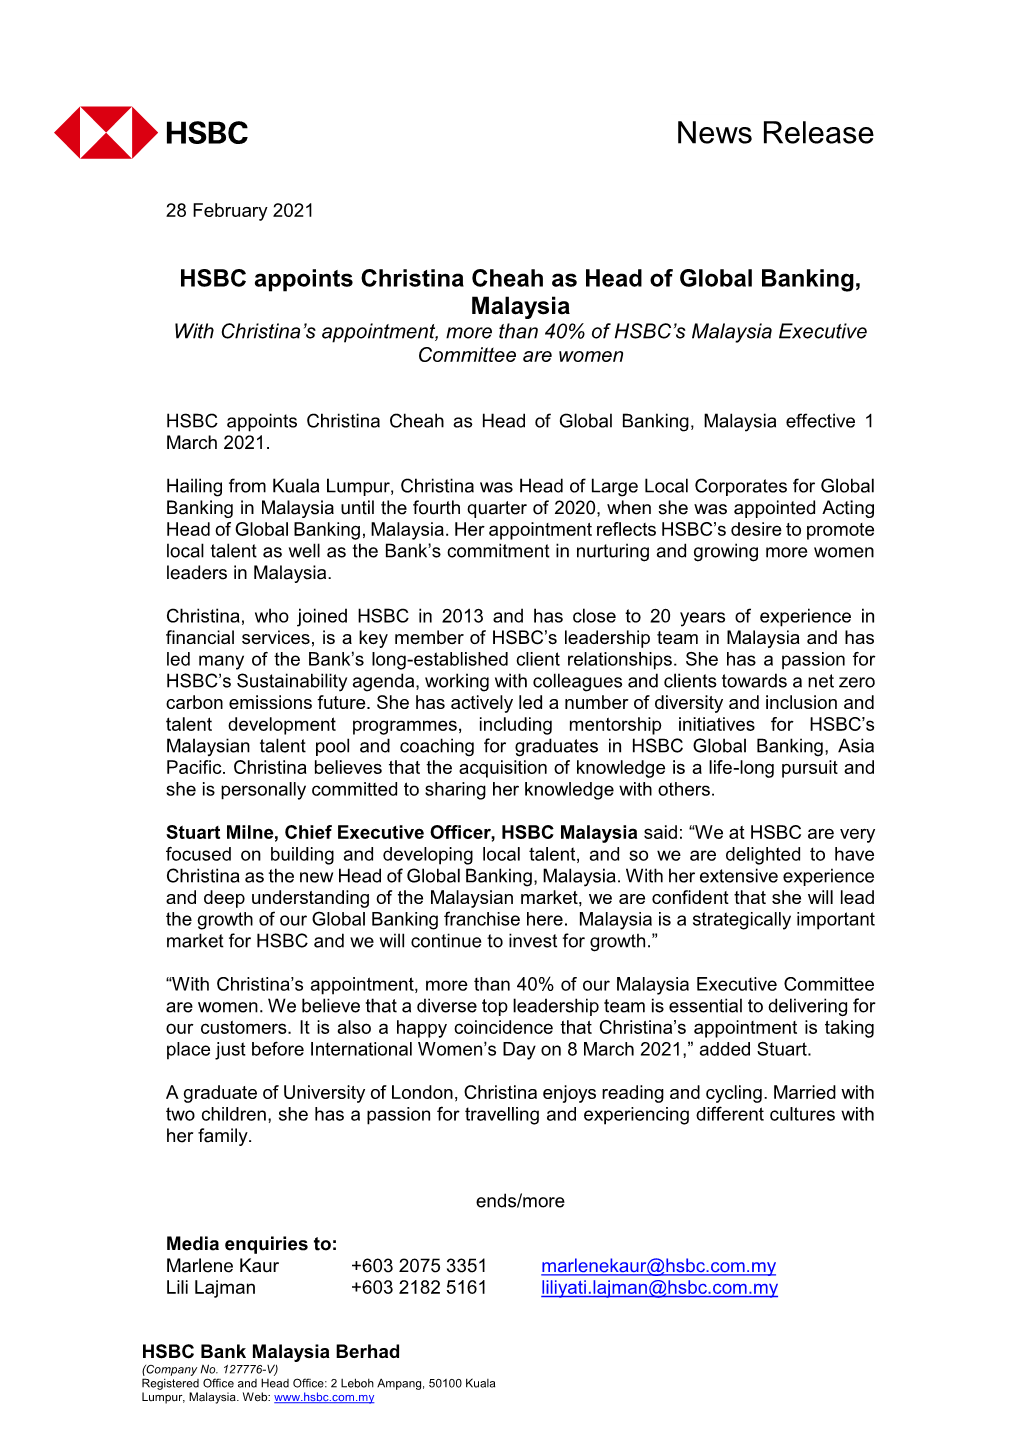 HSBC Appoints Christina Cheah As Head of Global Banking, Malaysia with Christina’S Appointment, More Than 40% of HSBC’S Malaysia Executive Committee Are Women